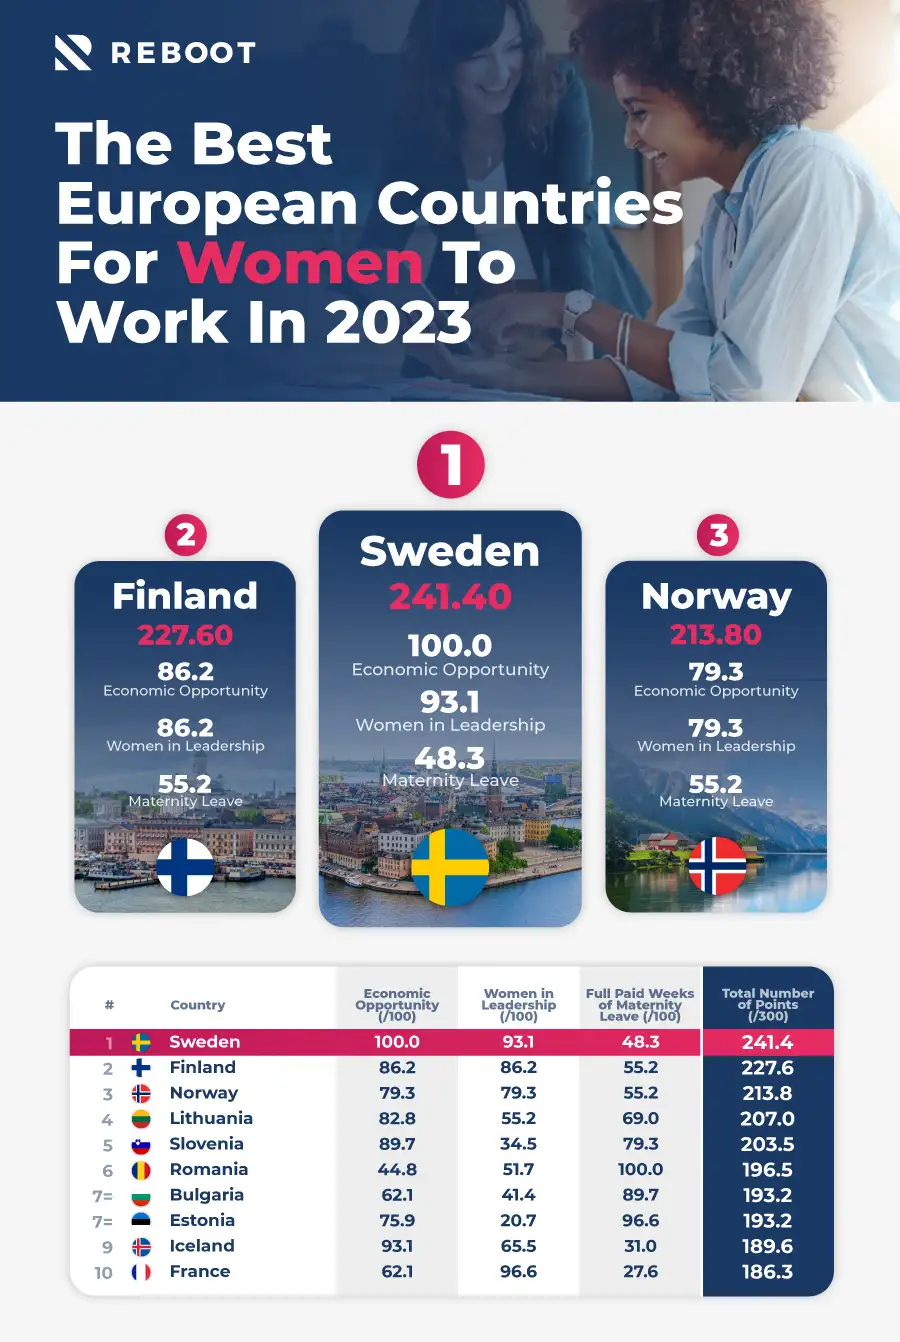 The best European countries for women to work in